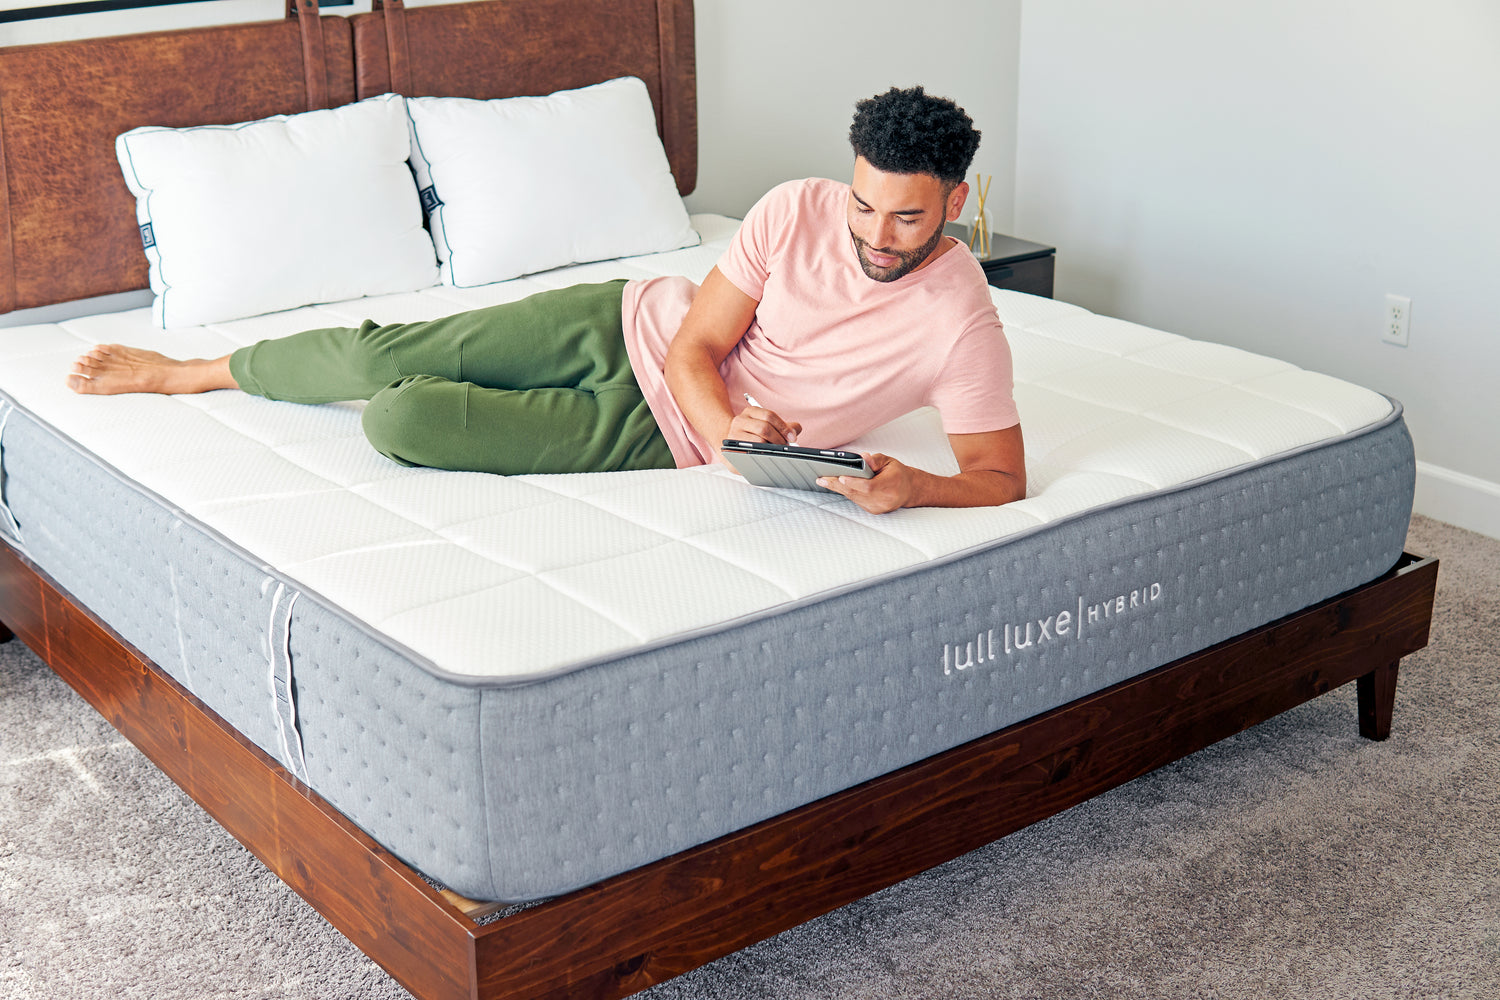 A man laying across a lull luxe hybrid mattress while on his tablet.